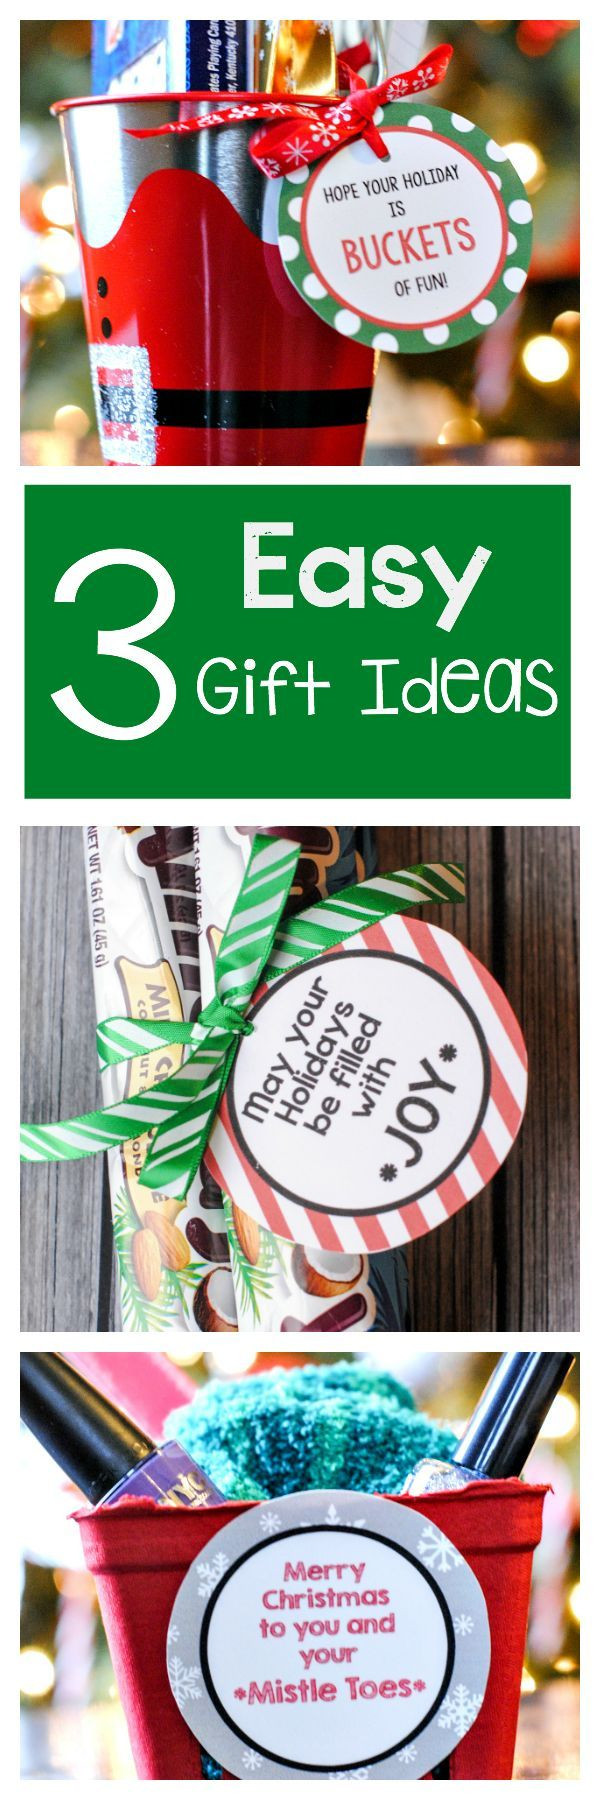 Thank You Gift Ideas For Coworkers Homemade
 Best 25 Thank you t ideas for coworkers ideas on